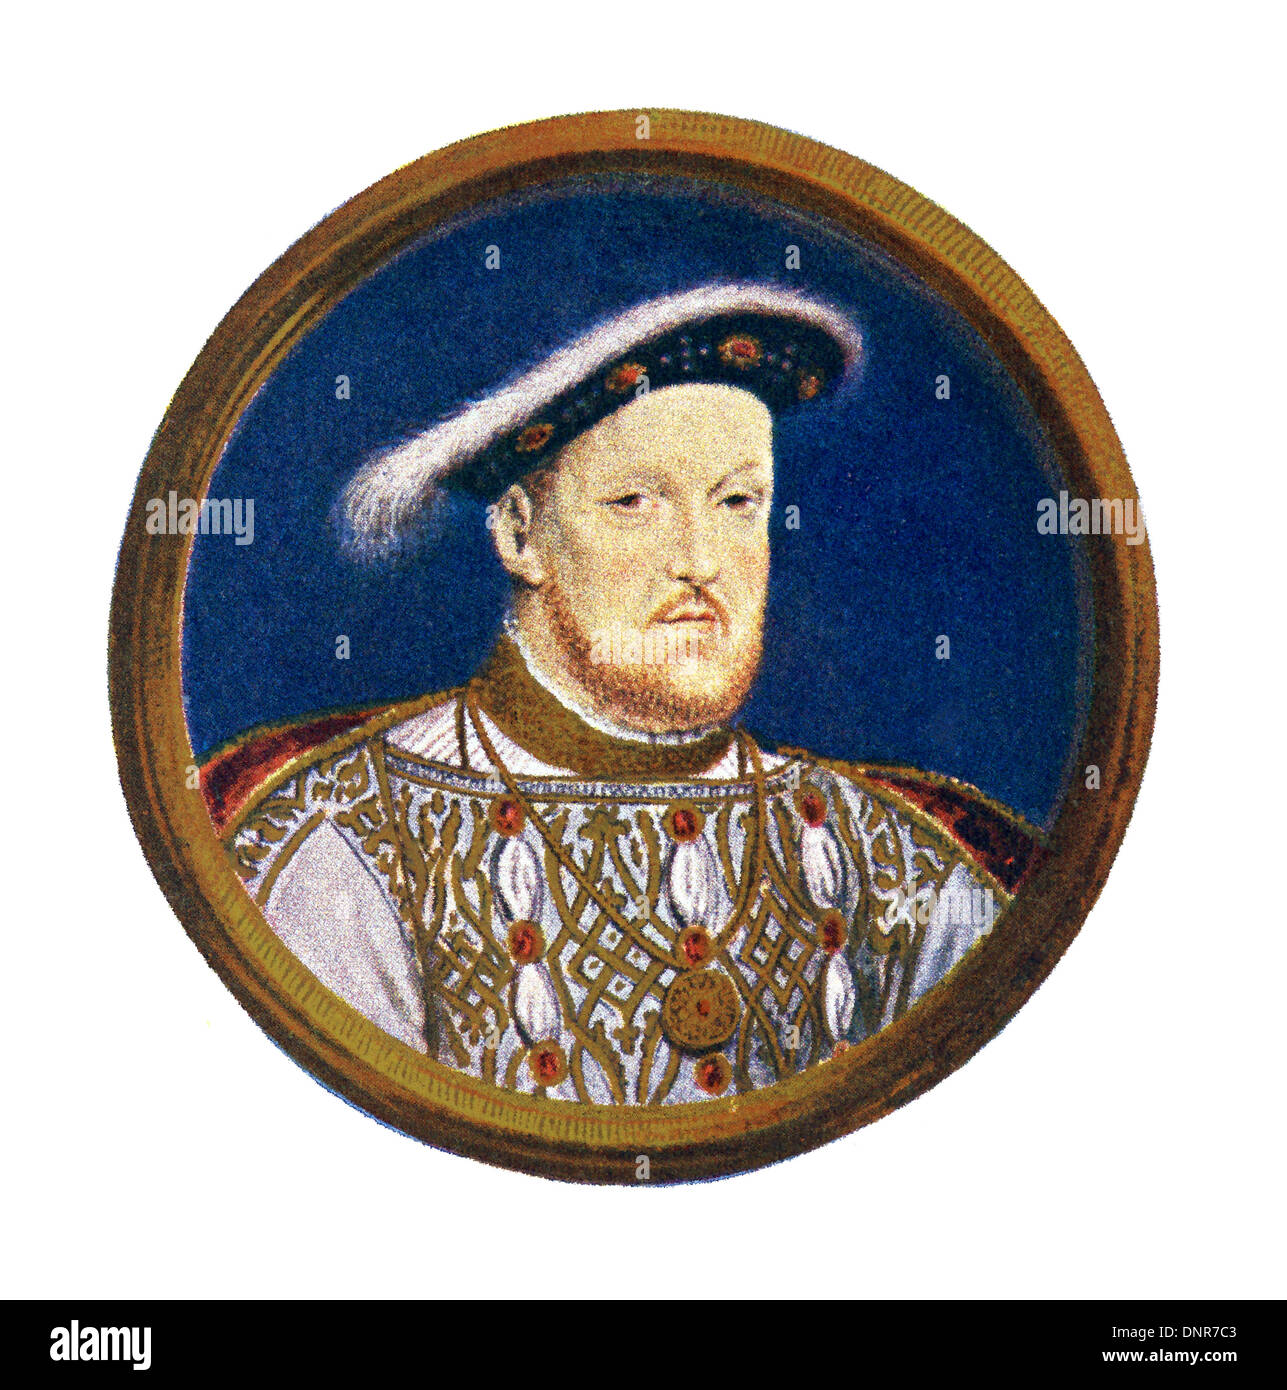 Vintage colour lithograph of King Henry VIII, after the painting by Hans Holbein, 16th Century Stock Photo